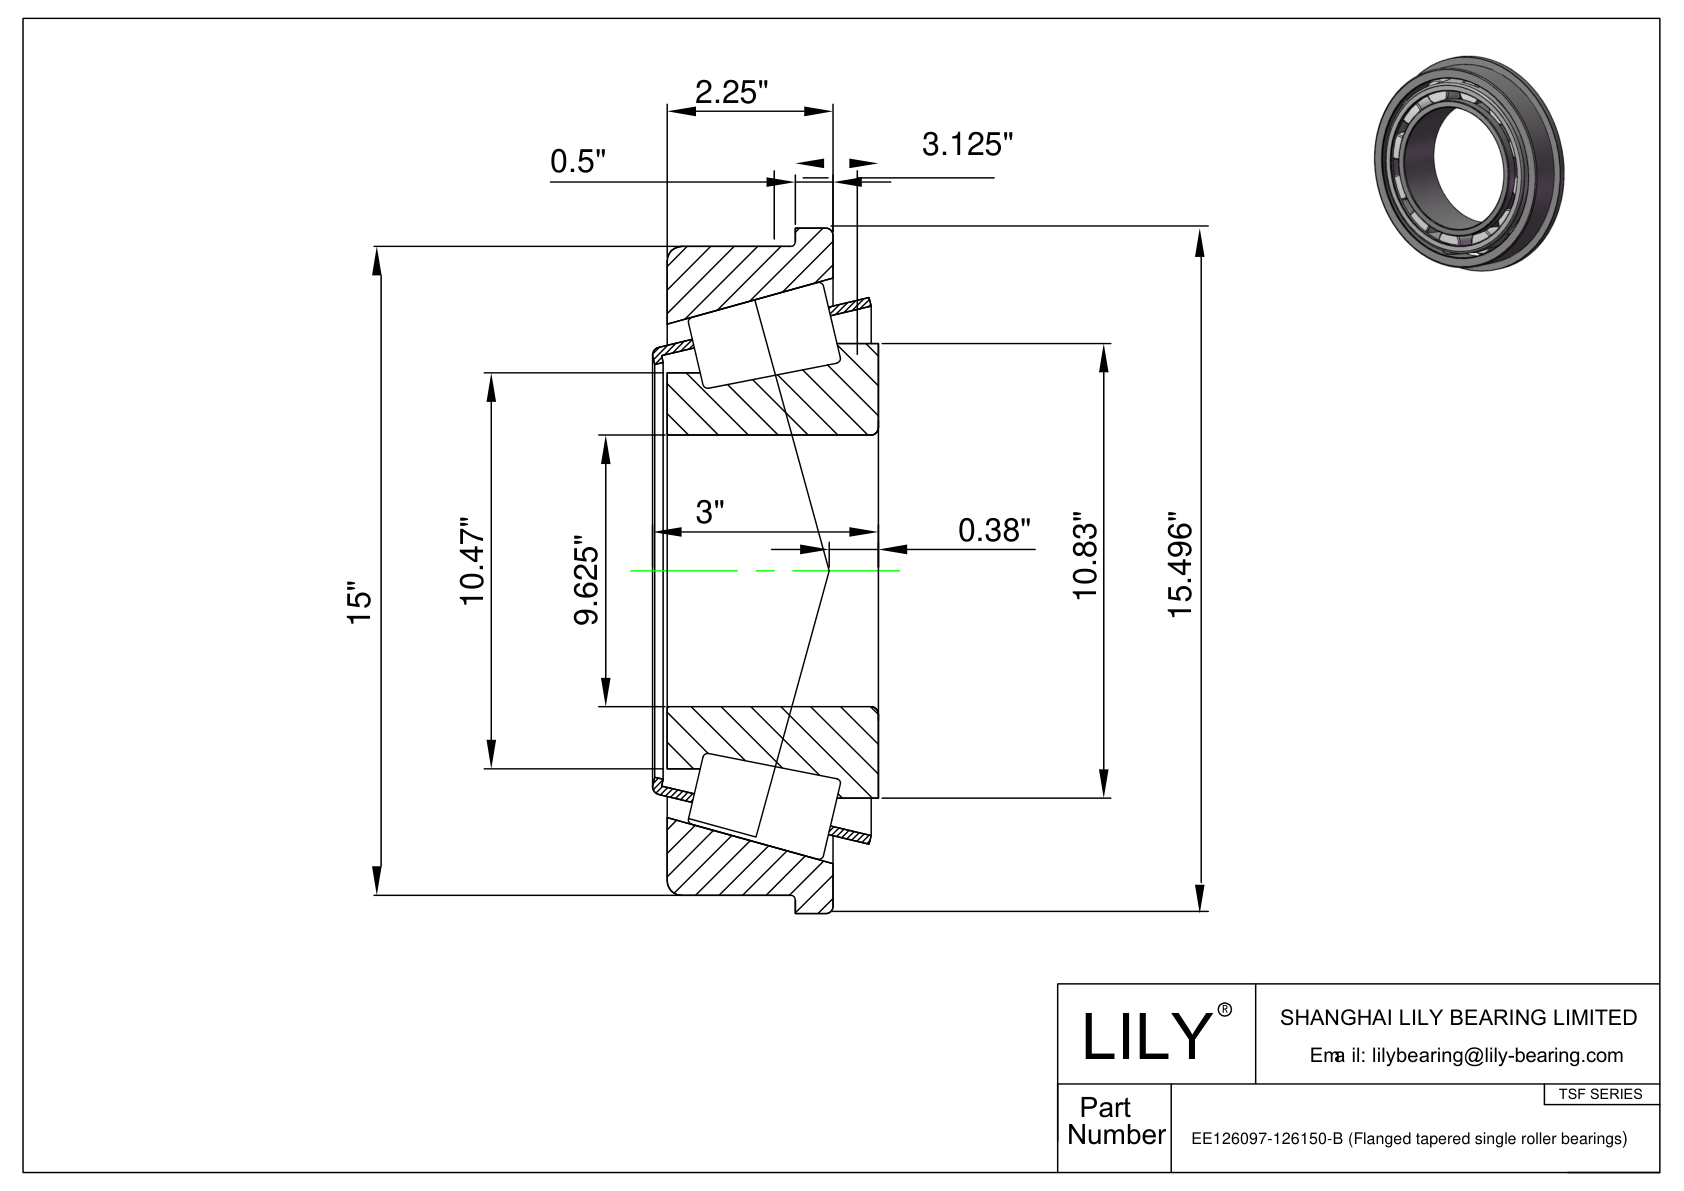 EE126097-126150-B TSF (Tapered Single Roller Bearings with Flange) (Imperial) cad drawing